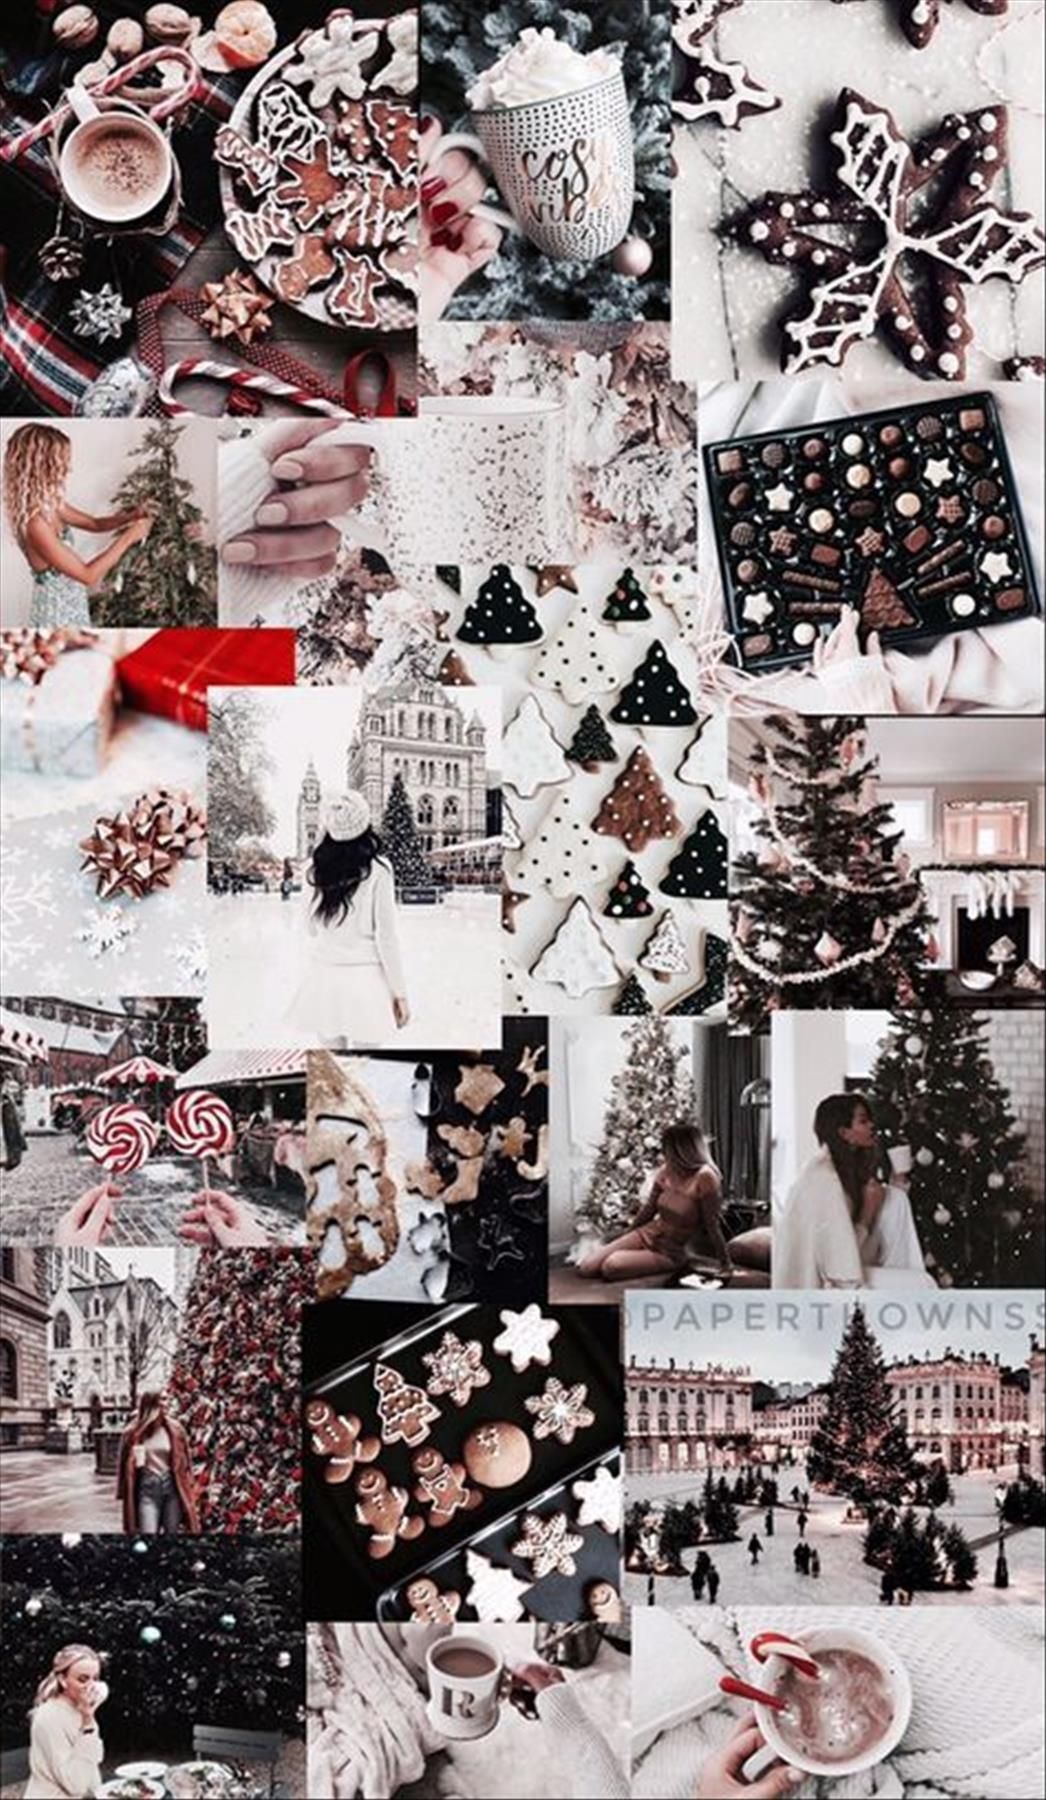 A collage of pictures with christmas decorations and food - Christmas